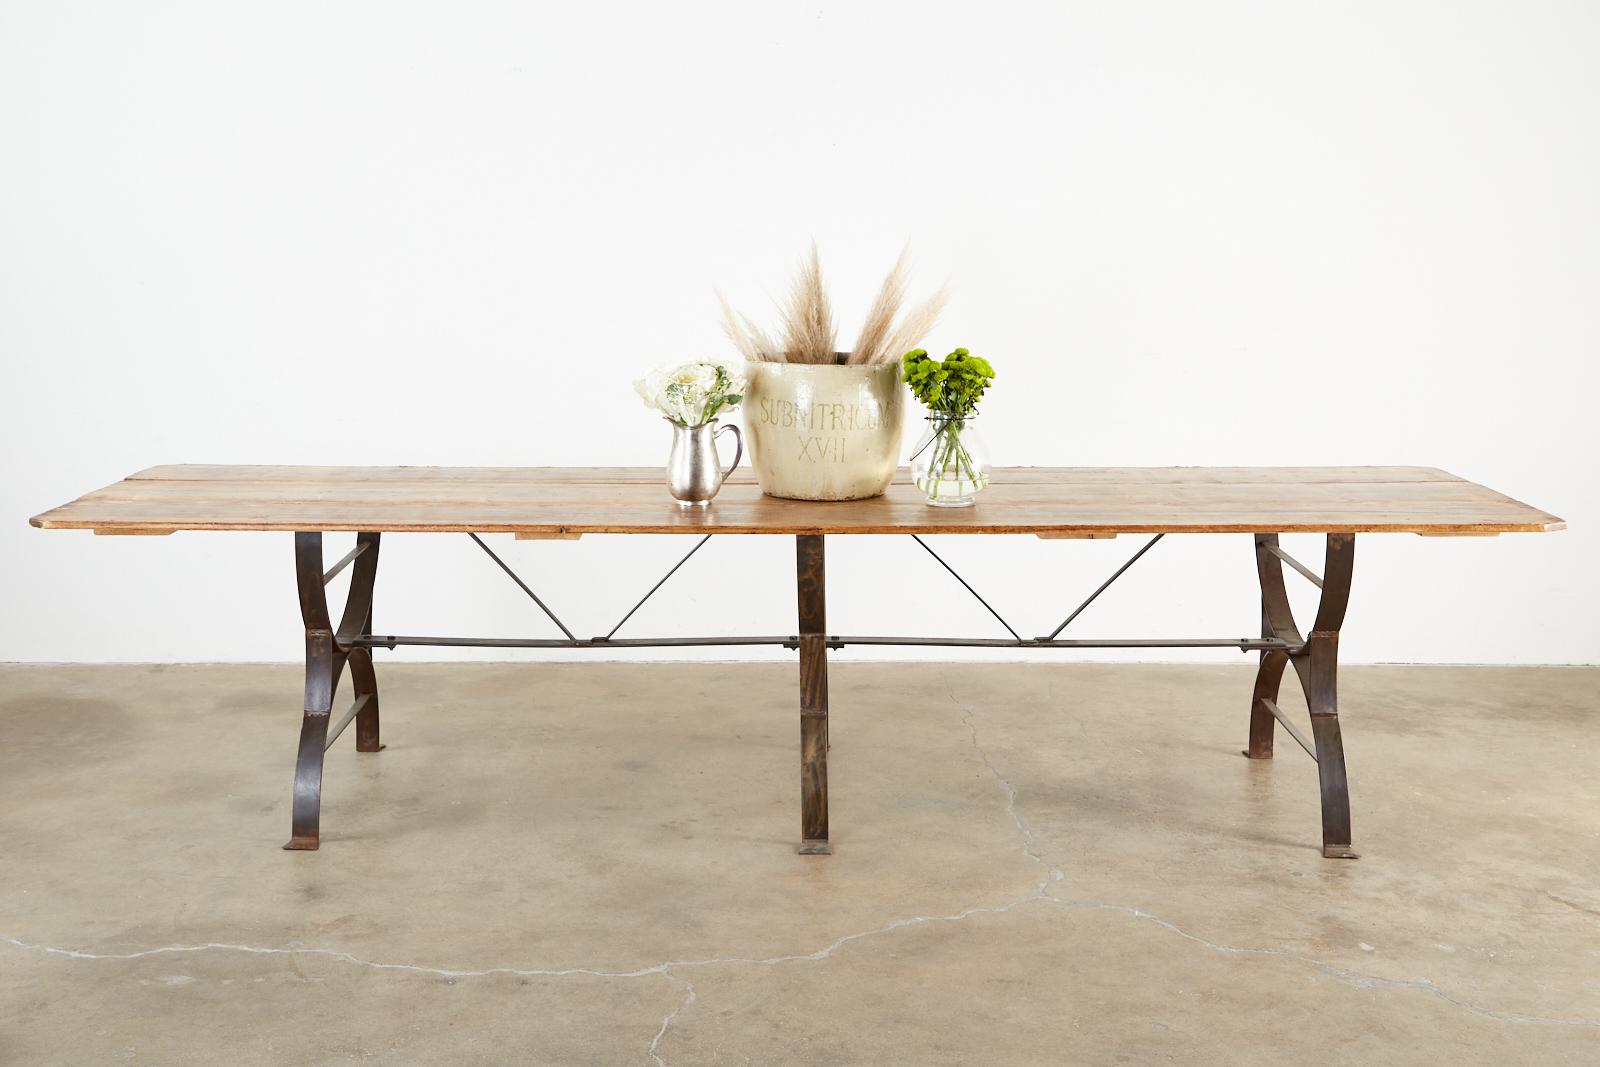 Monumental harvest table or farmhouse dining table featuring a triple leg cast iron trestle base measuring nearly 11 feet long with a rustic pine plank top. The cast iron Curule leg bases are conjoined by a long cross stretcher having a decorative